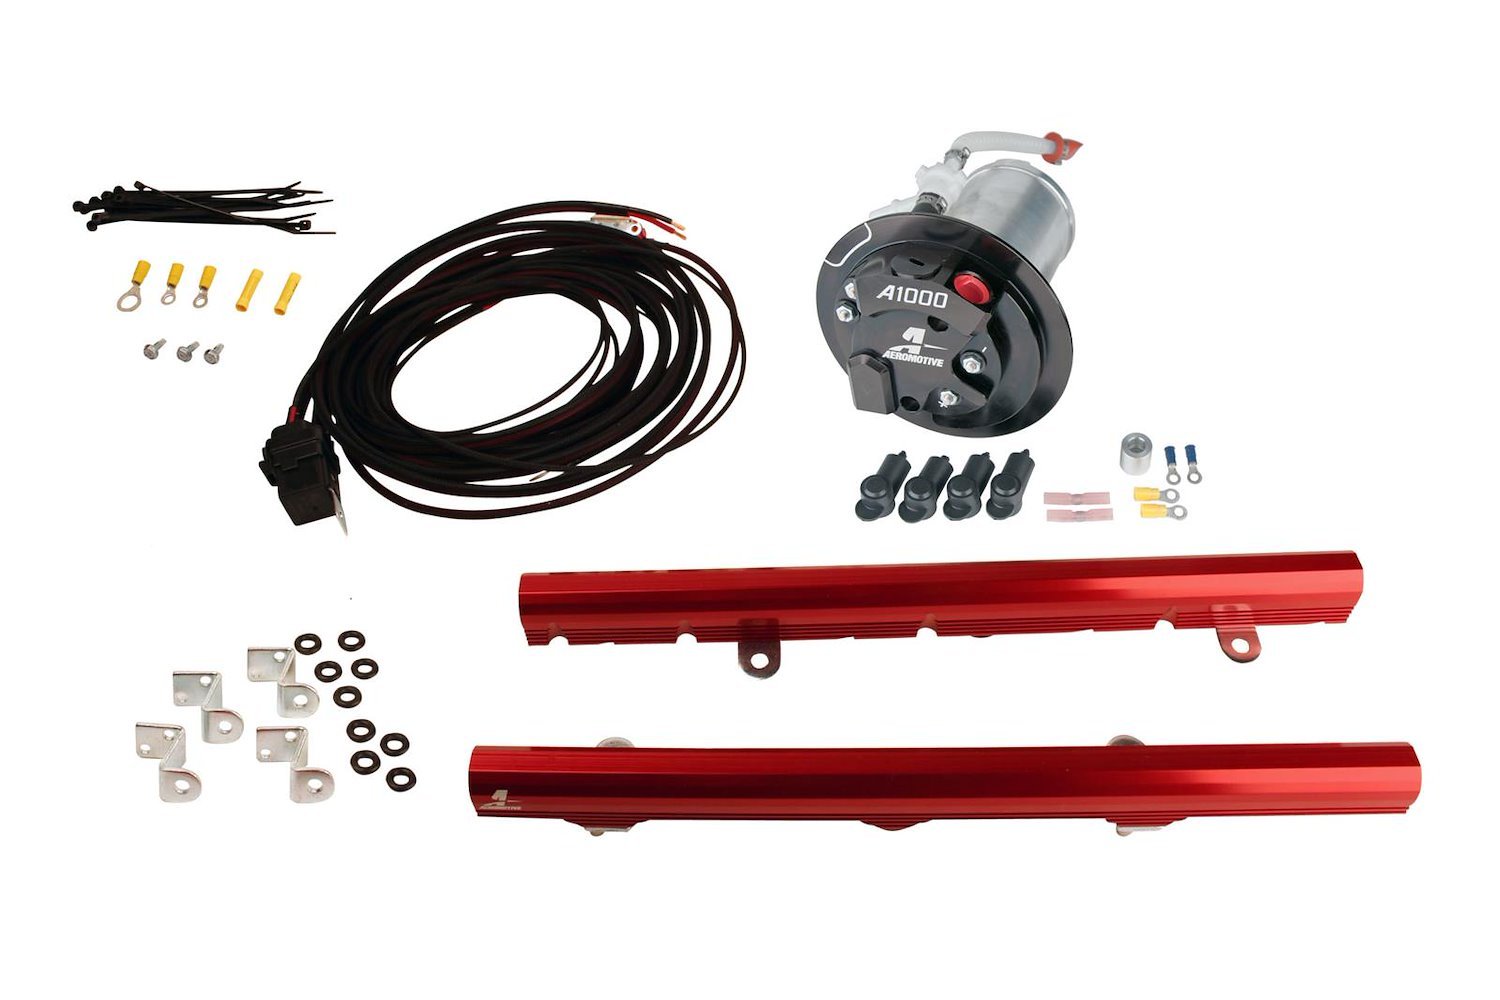 2010-2011 Stealth Fuel System Kits